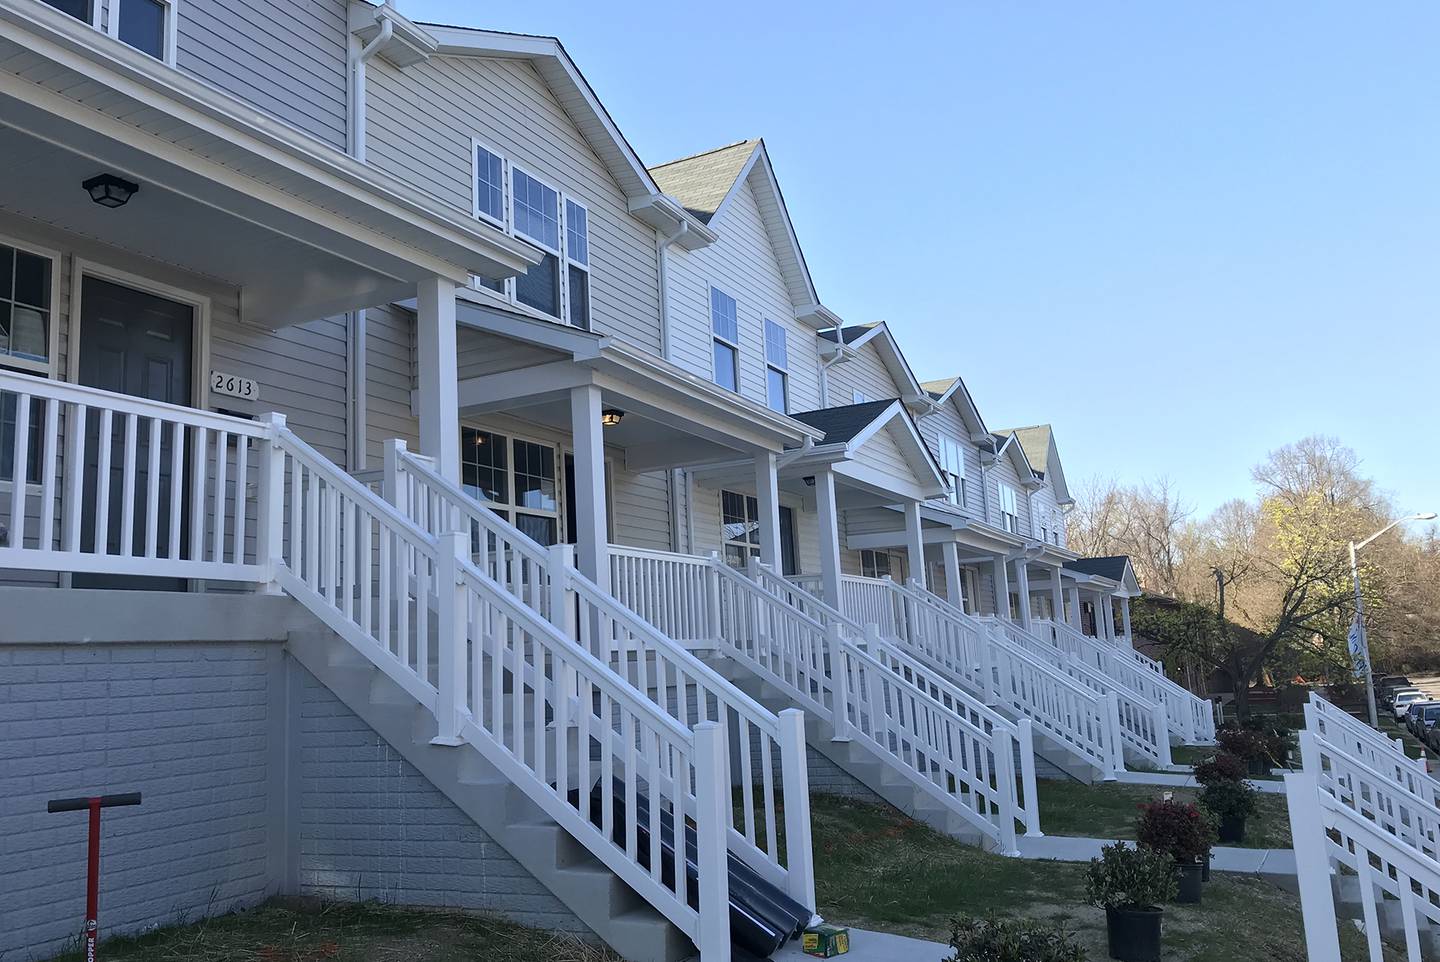 Town homes painted in light colors with a clear blue sky and porches with white railings leading to neat front yards.